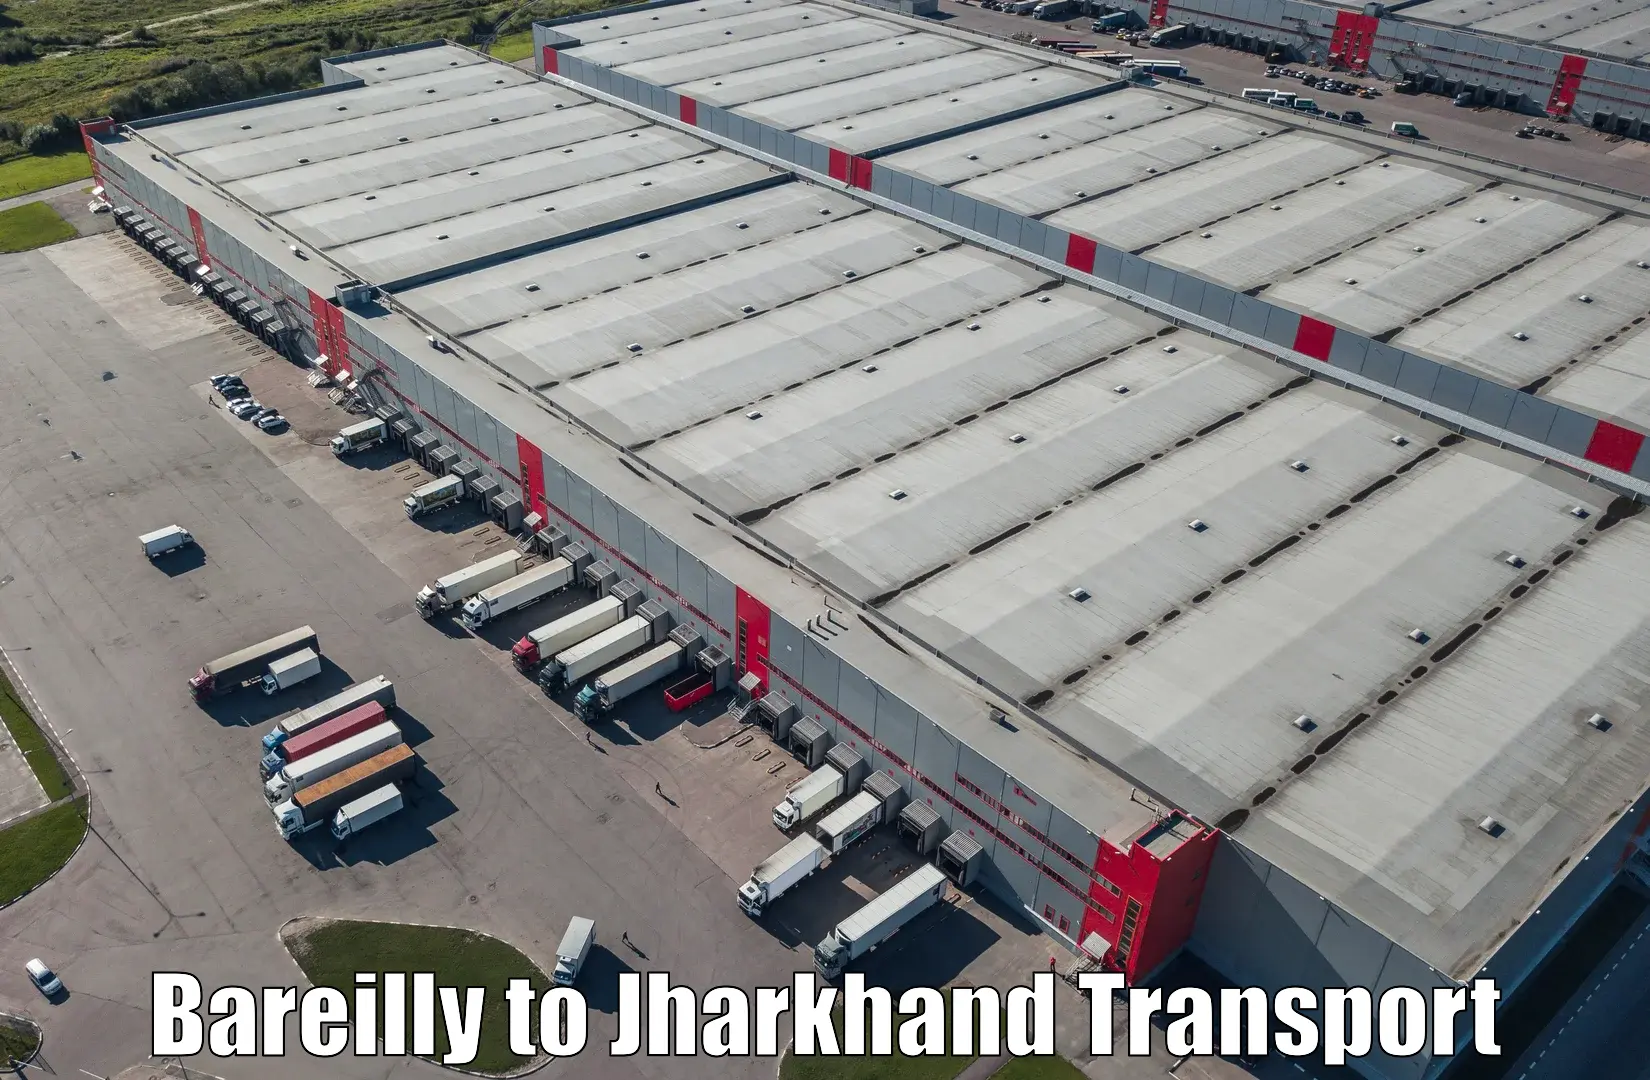 Commercial transport service Bareilly to Hazaribagh